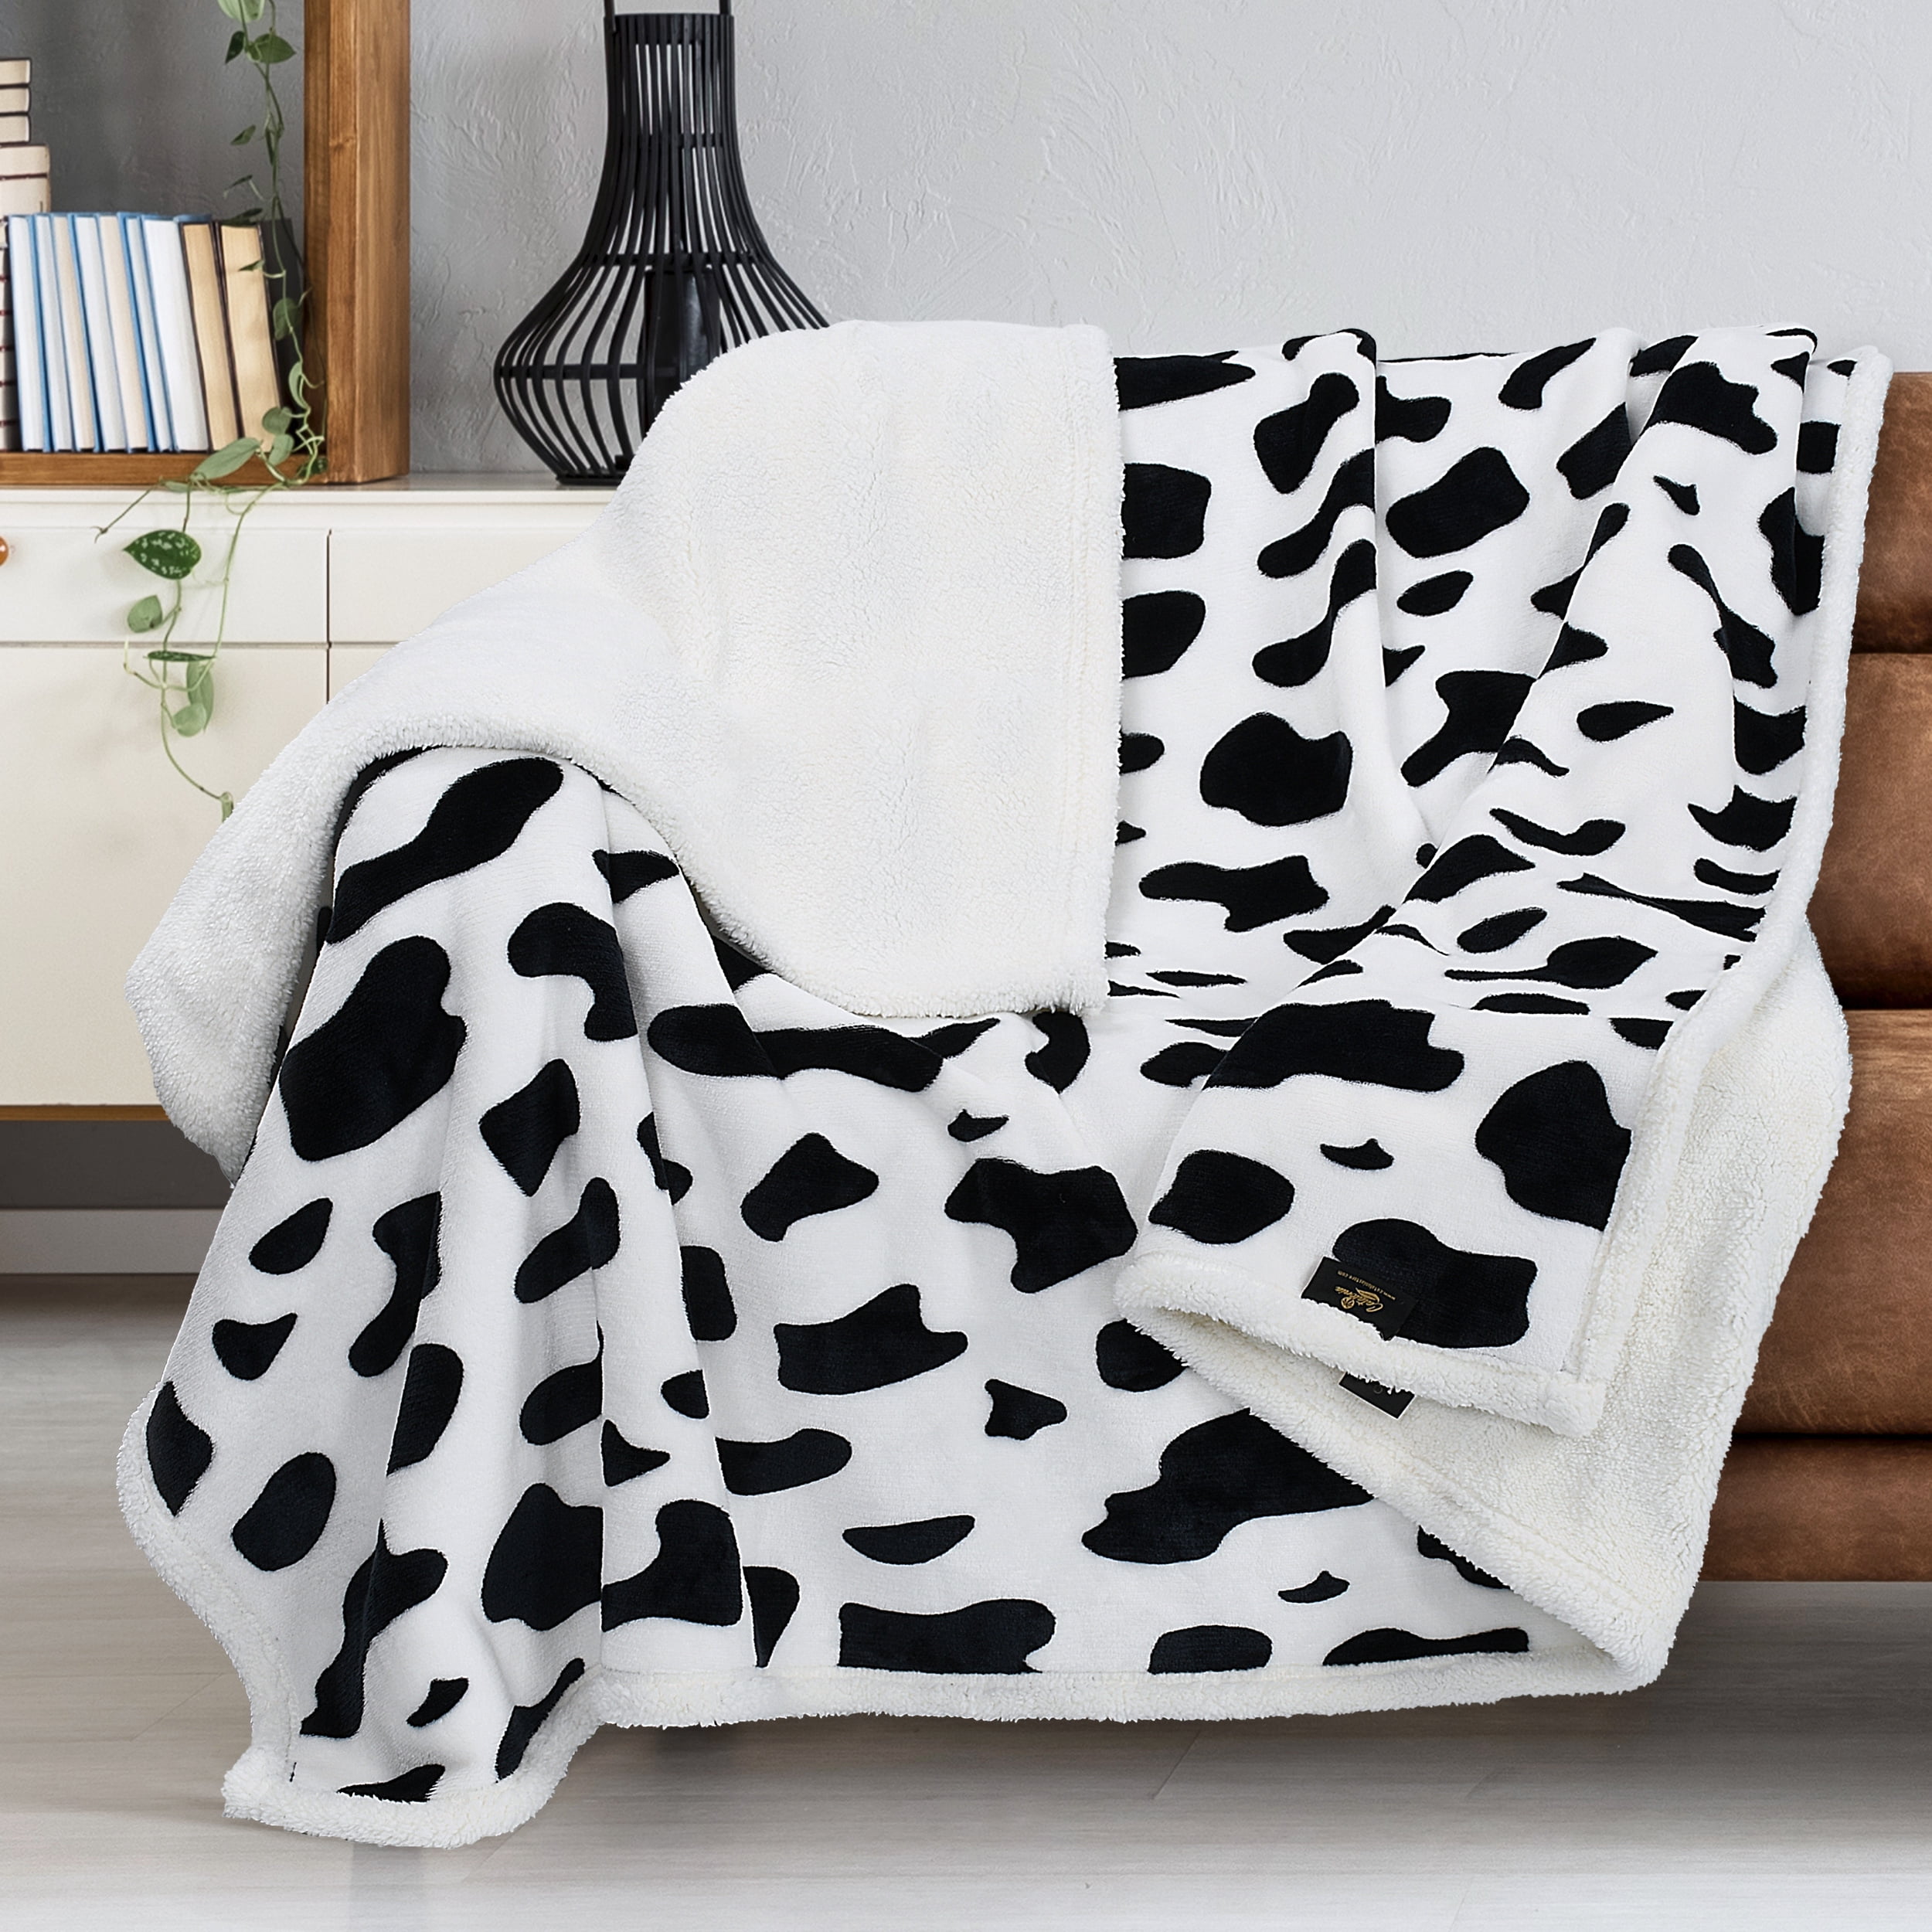 Catalonia Cow Print Sherpa Fleece Blanket, Super Soft Warm Cozy Flannel Reversible  Throw Blanket for Couch Sofa Bed, 50 x 60 